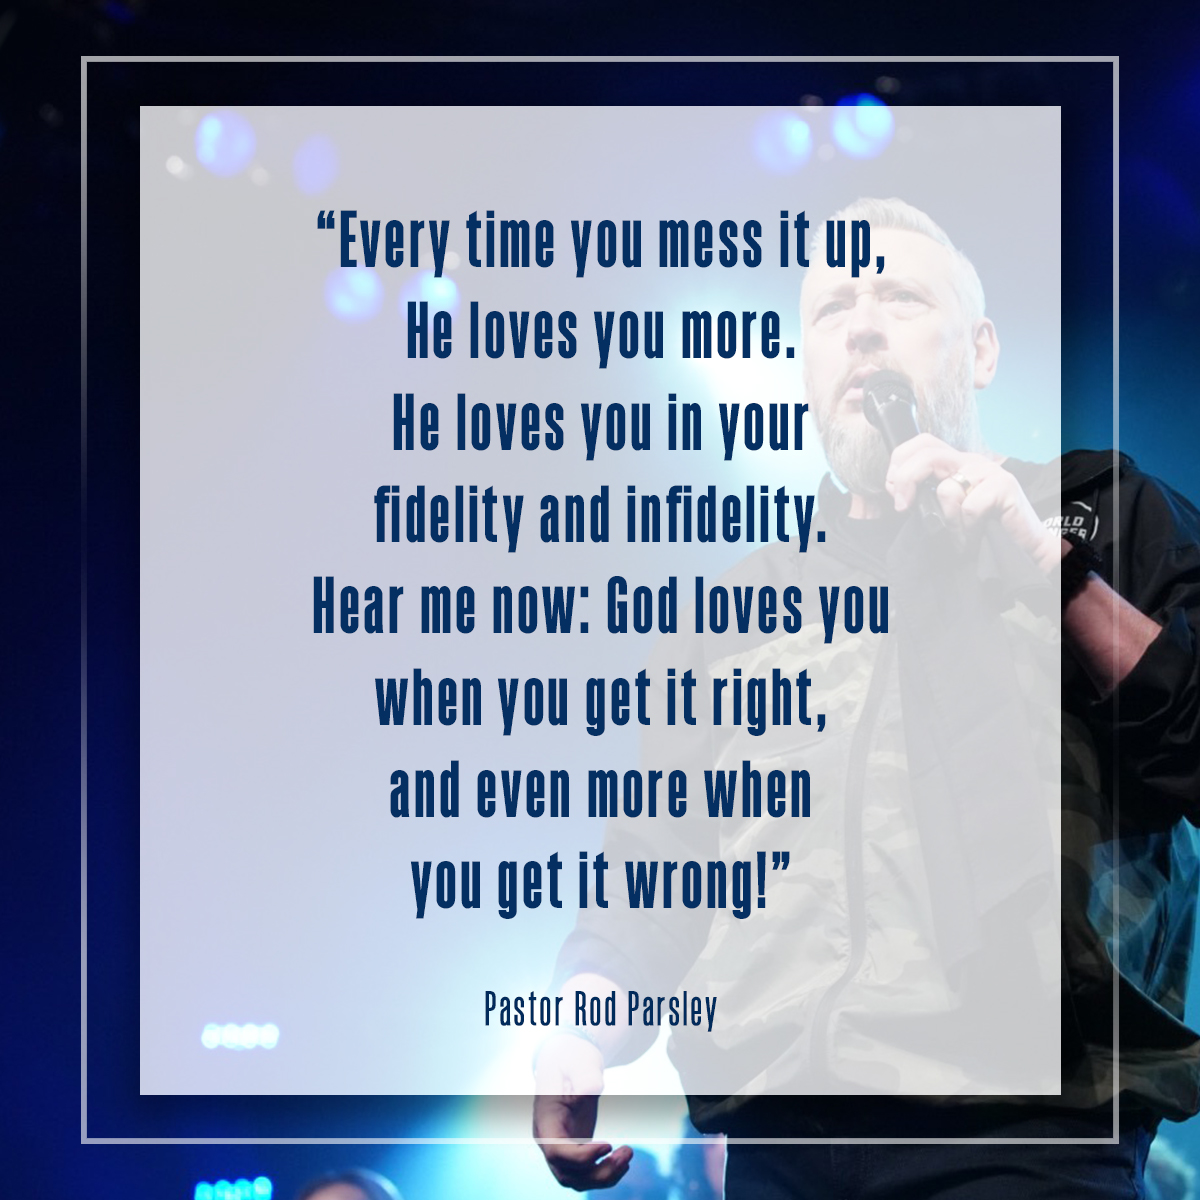 “Every time you mess it up, He loves you more. He loves you in your fidelity and infidelity. Hear me now: God loves you when you get it right, and even more when you get it wrong!” – Pastor Rod Parsley